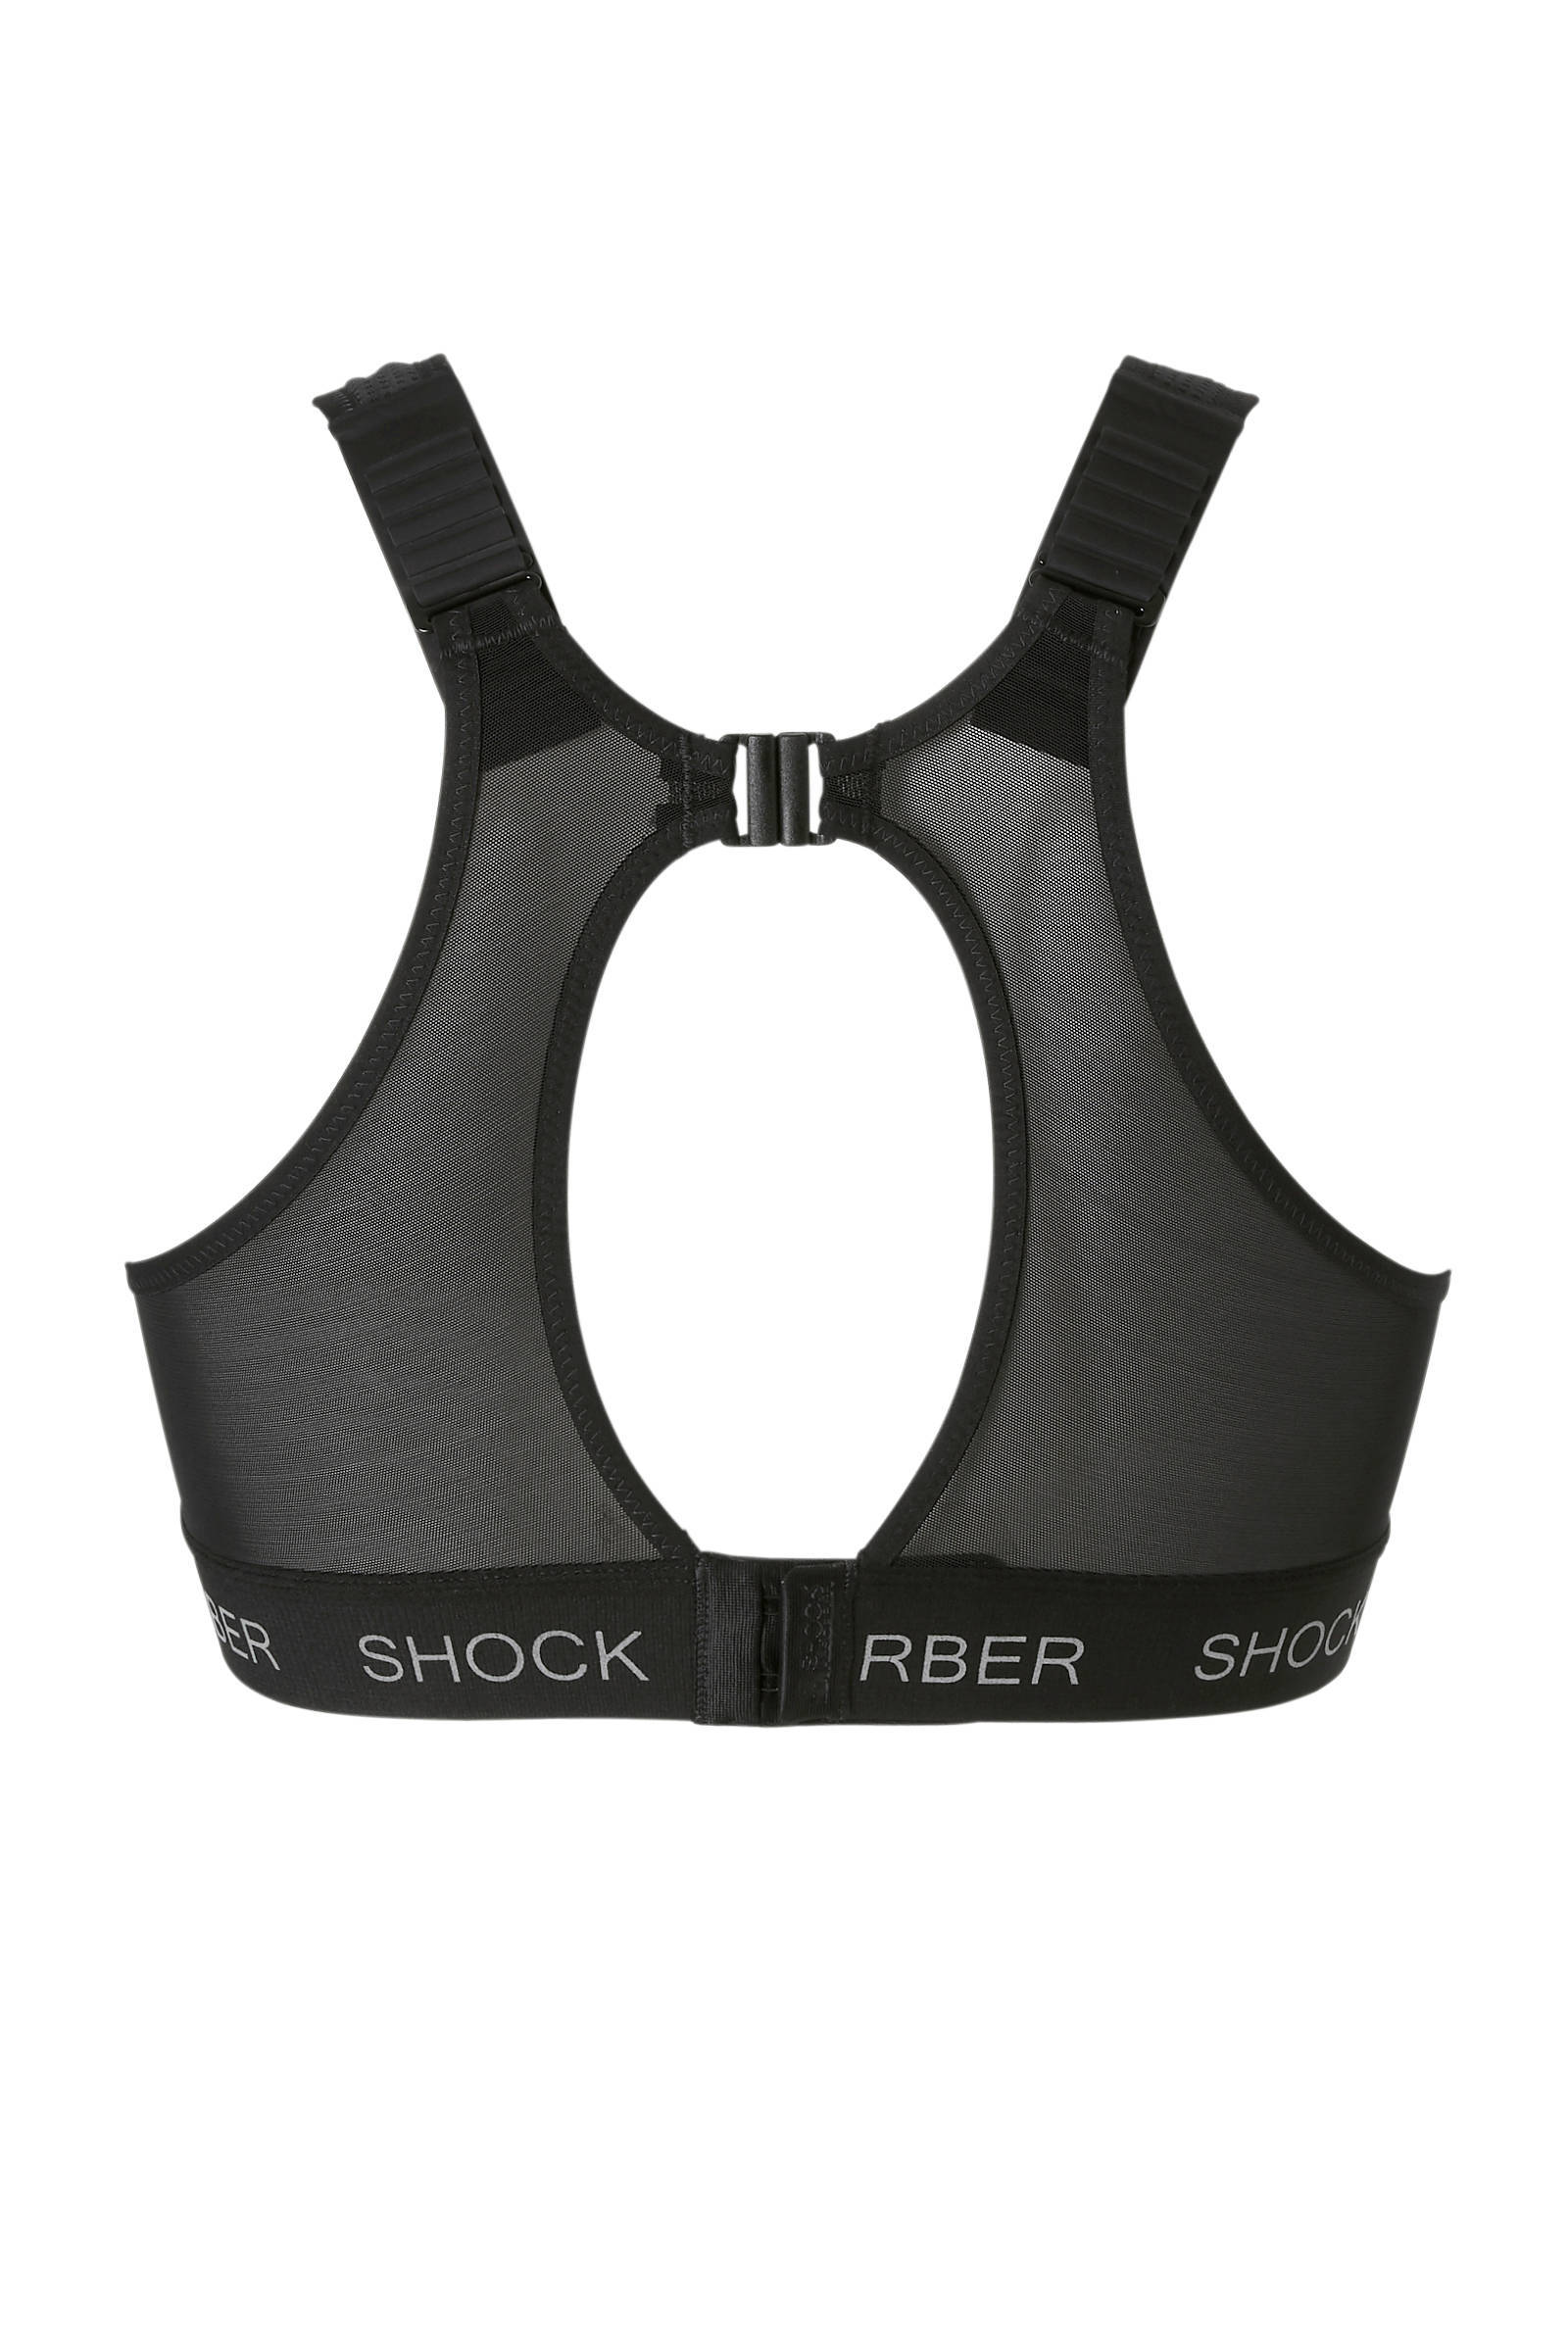 Shock Absorber Ultimate Run Padded Store -  1710875851